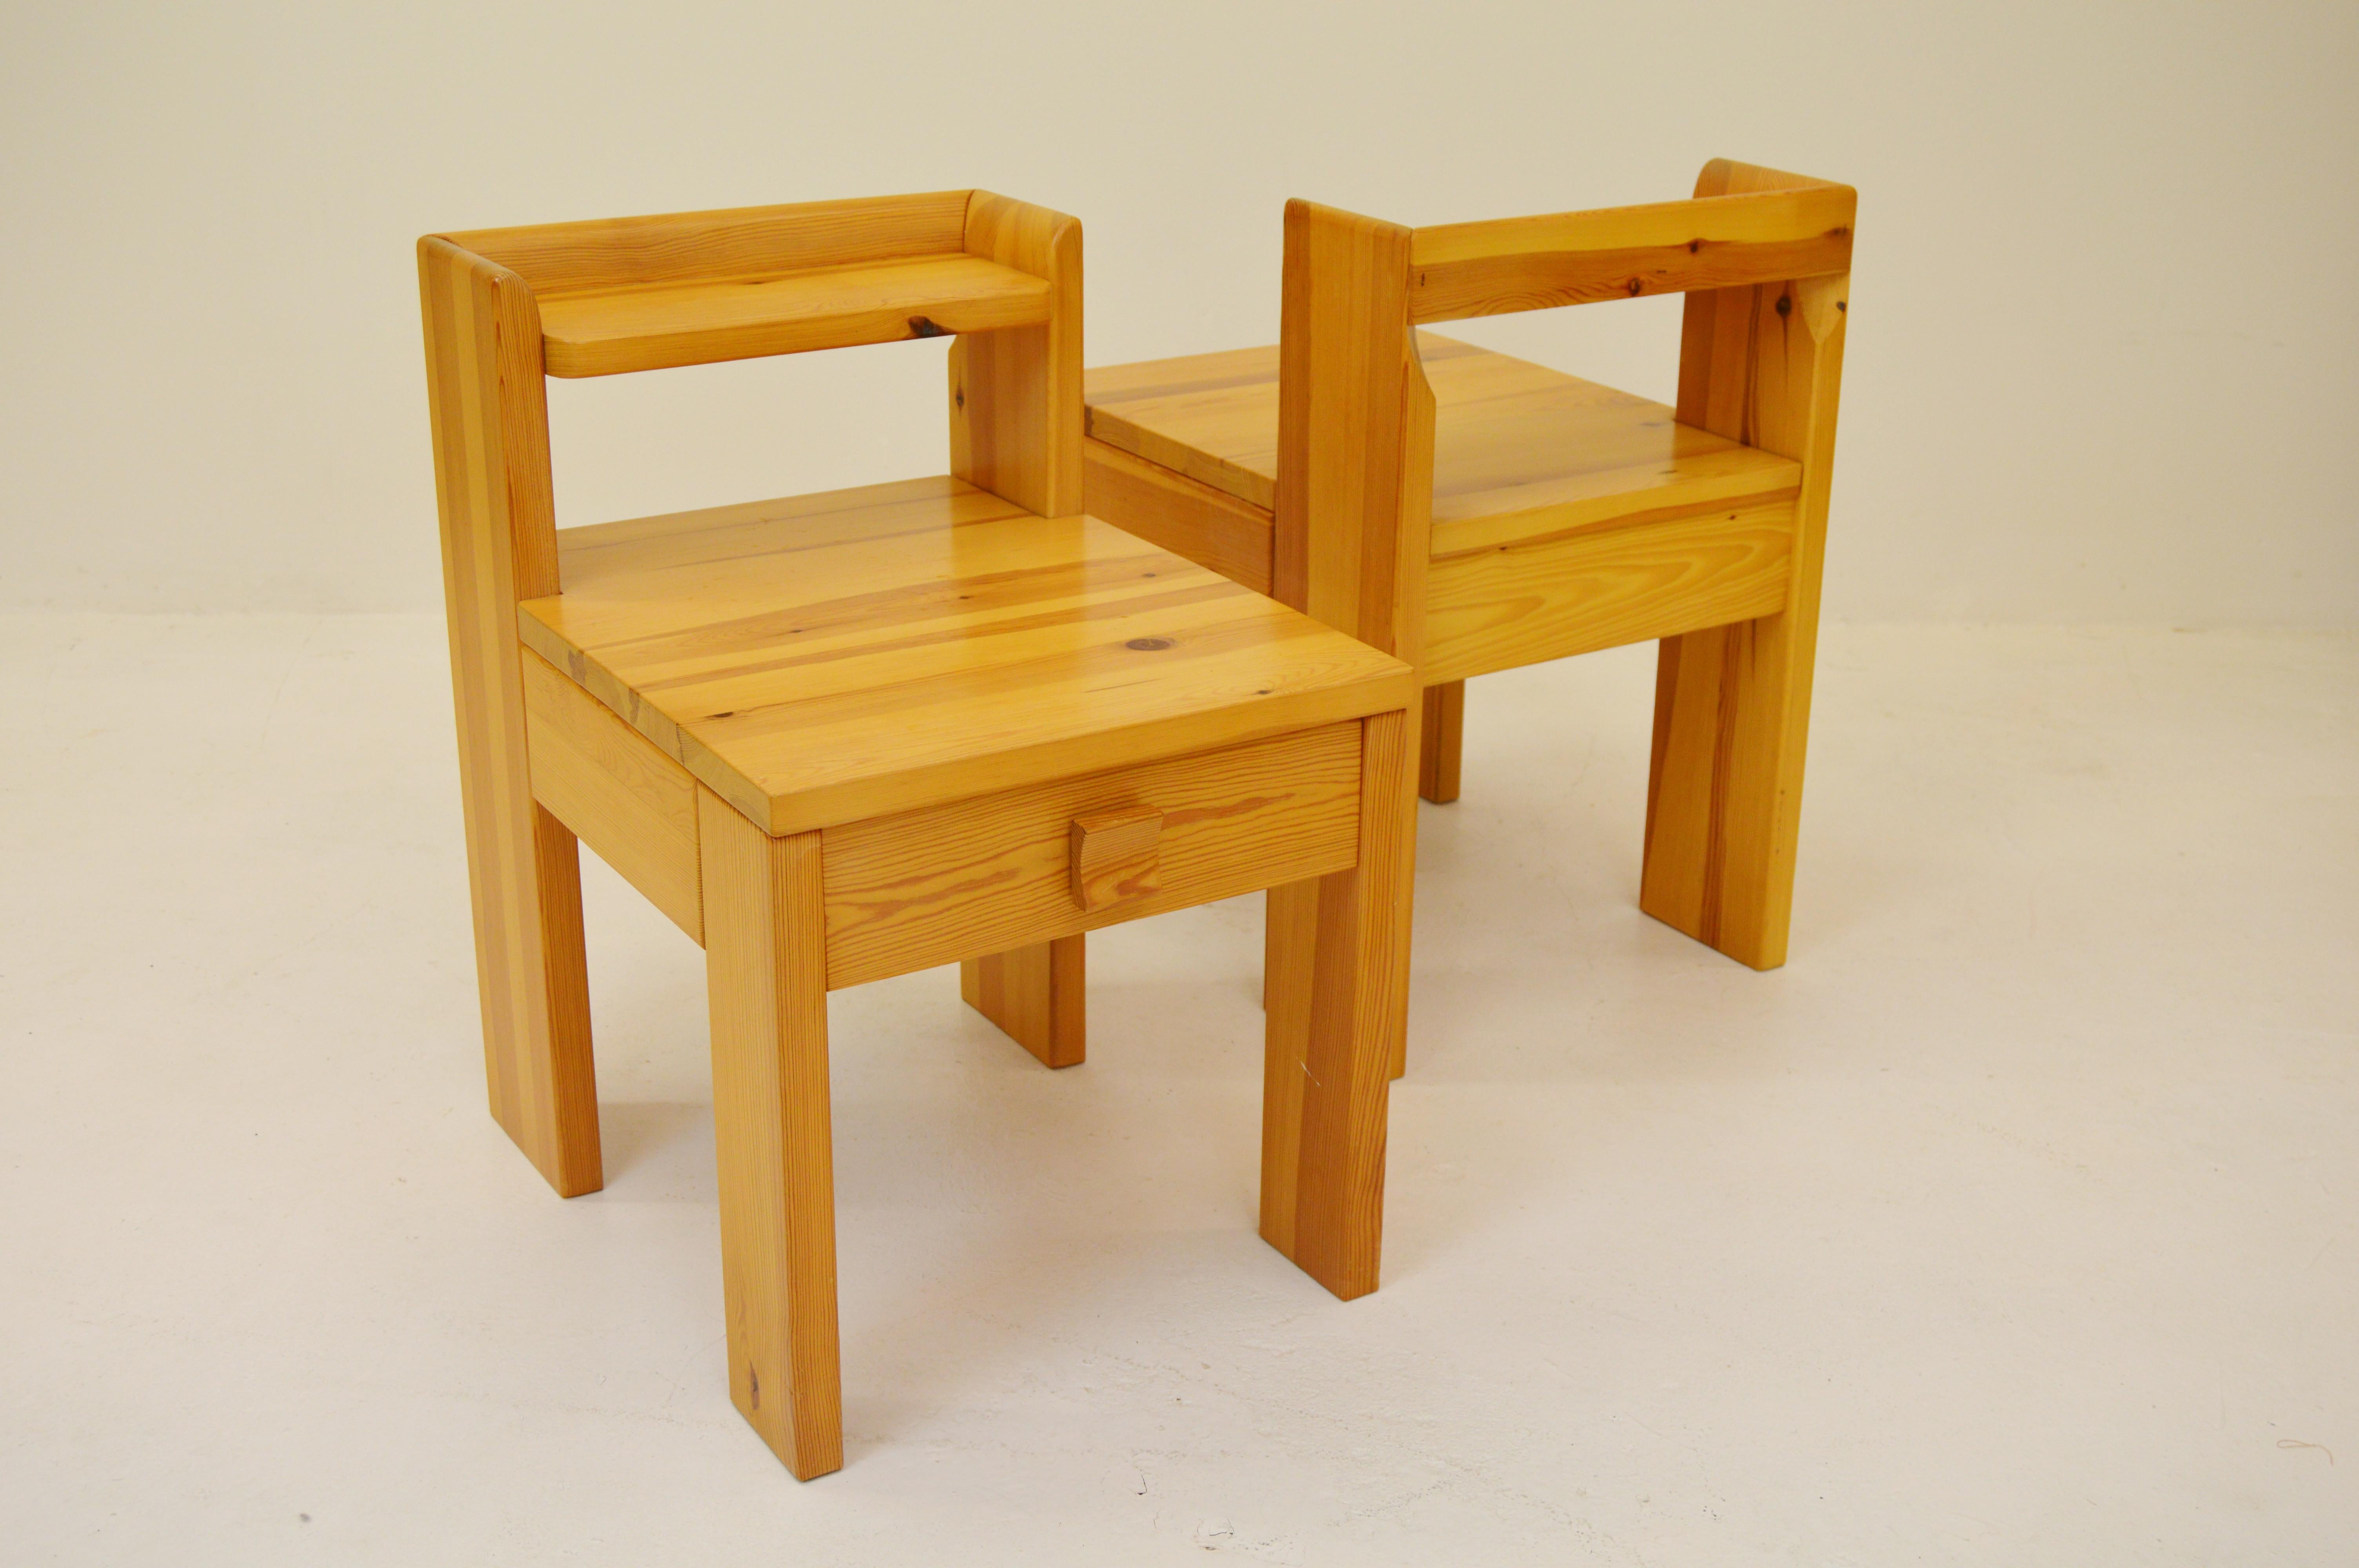 A pair of rustic and sophisticated bedside tables made from solid pine. Each table have a single drawer. They are stabile in their construction and are likely to be used as pallets as well.

Simple but yet so appealing Scandinavian Modern design.